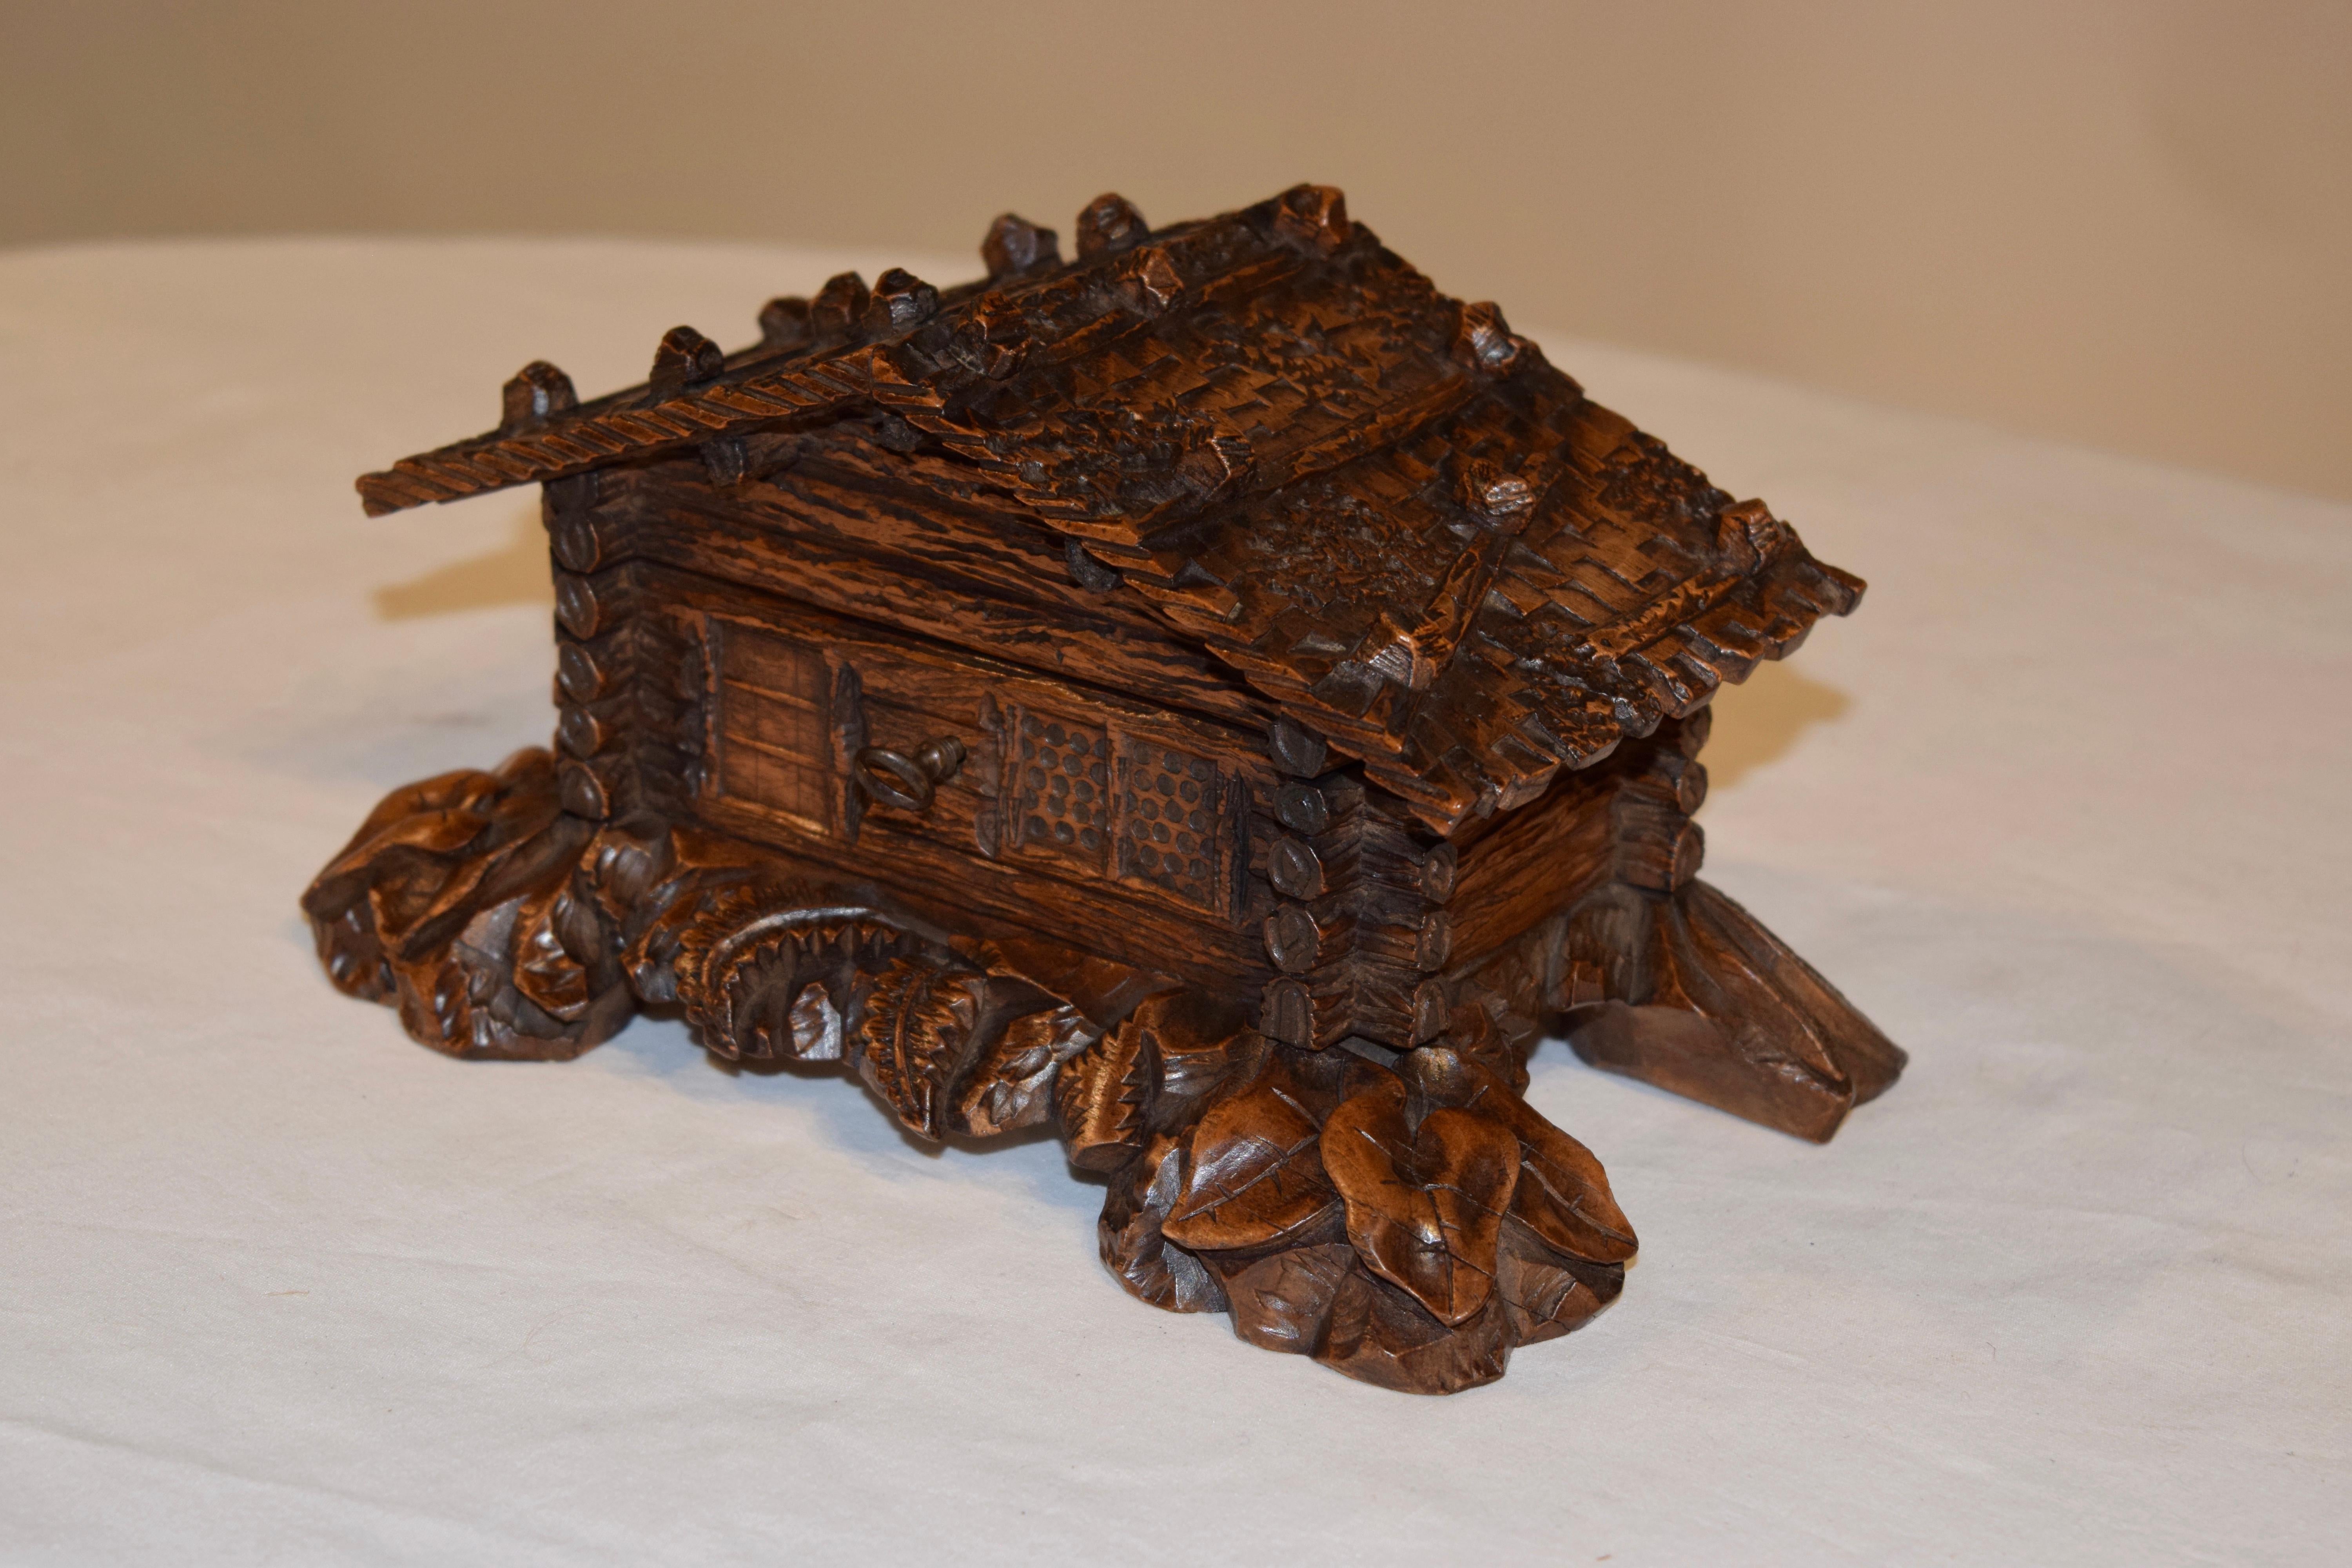 19th century black forest hand carved jewelry box from Switzerland in the shape of a cottage. The entire cottage has exquisite detail in the carving, and is depicted as a hewn log cabin with beams on the roof and massive flora surrounding the